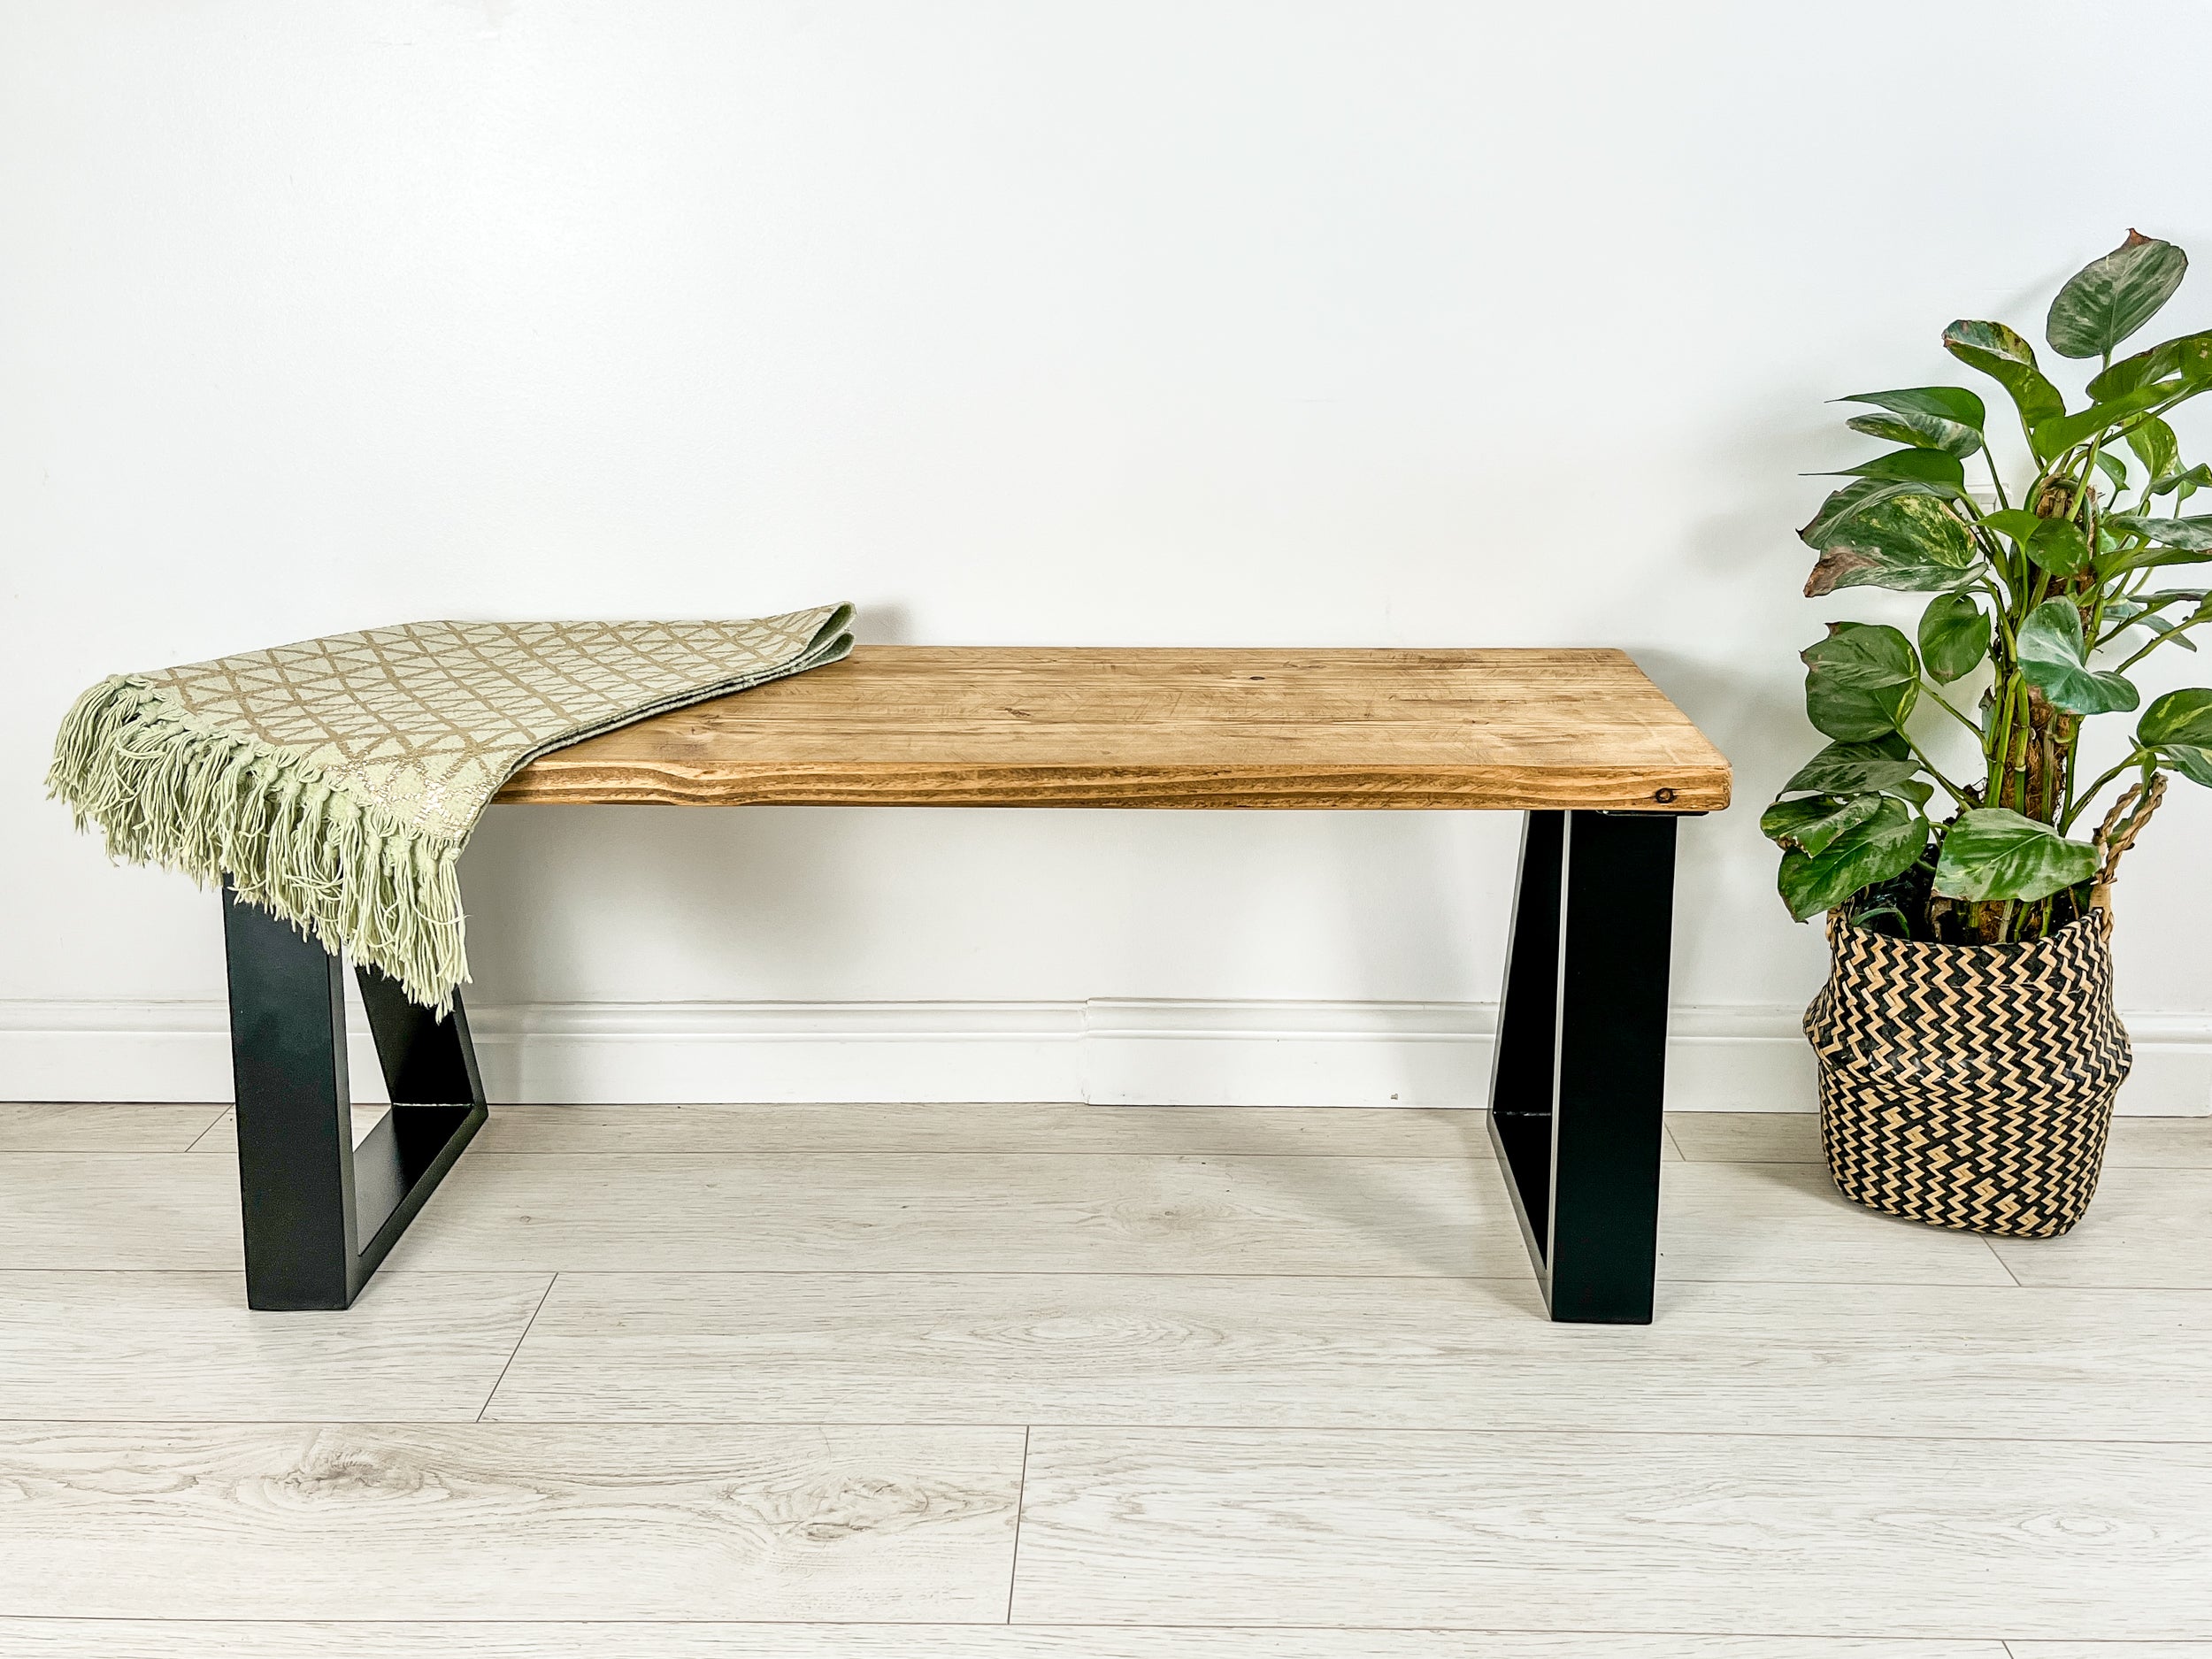 Rustic Wood Bench with Trapezium Steel Frame Legs